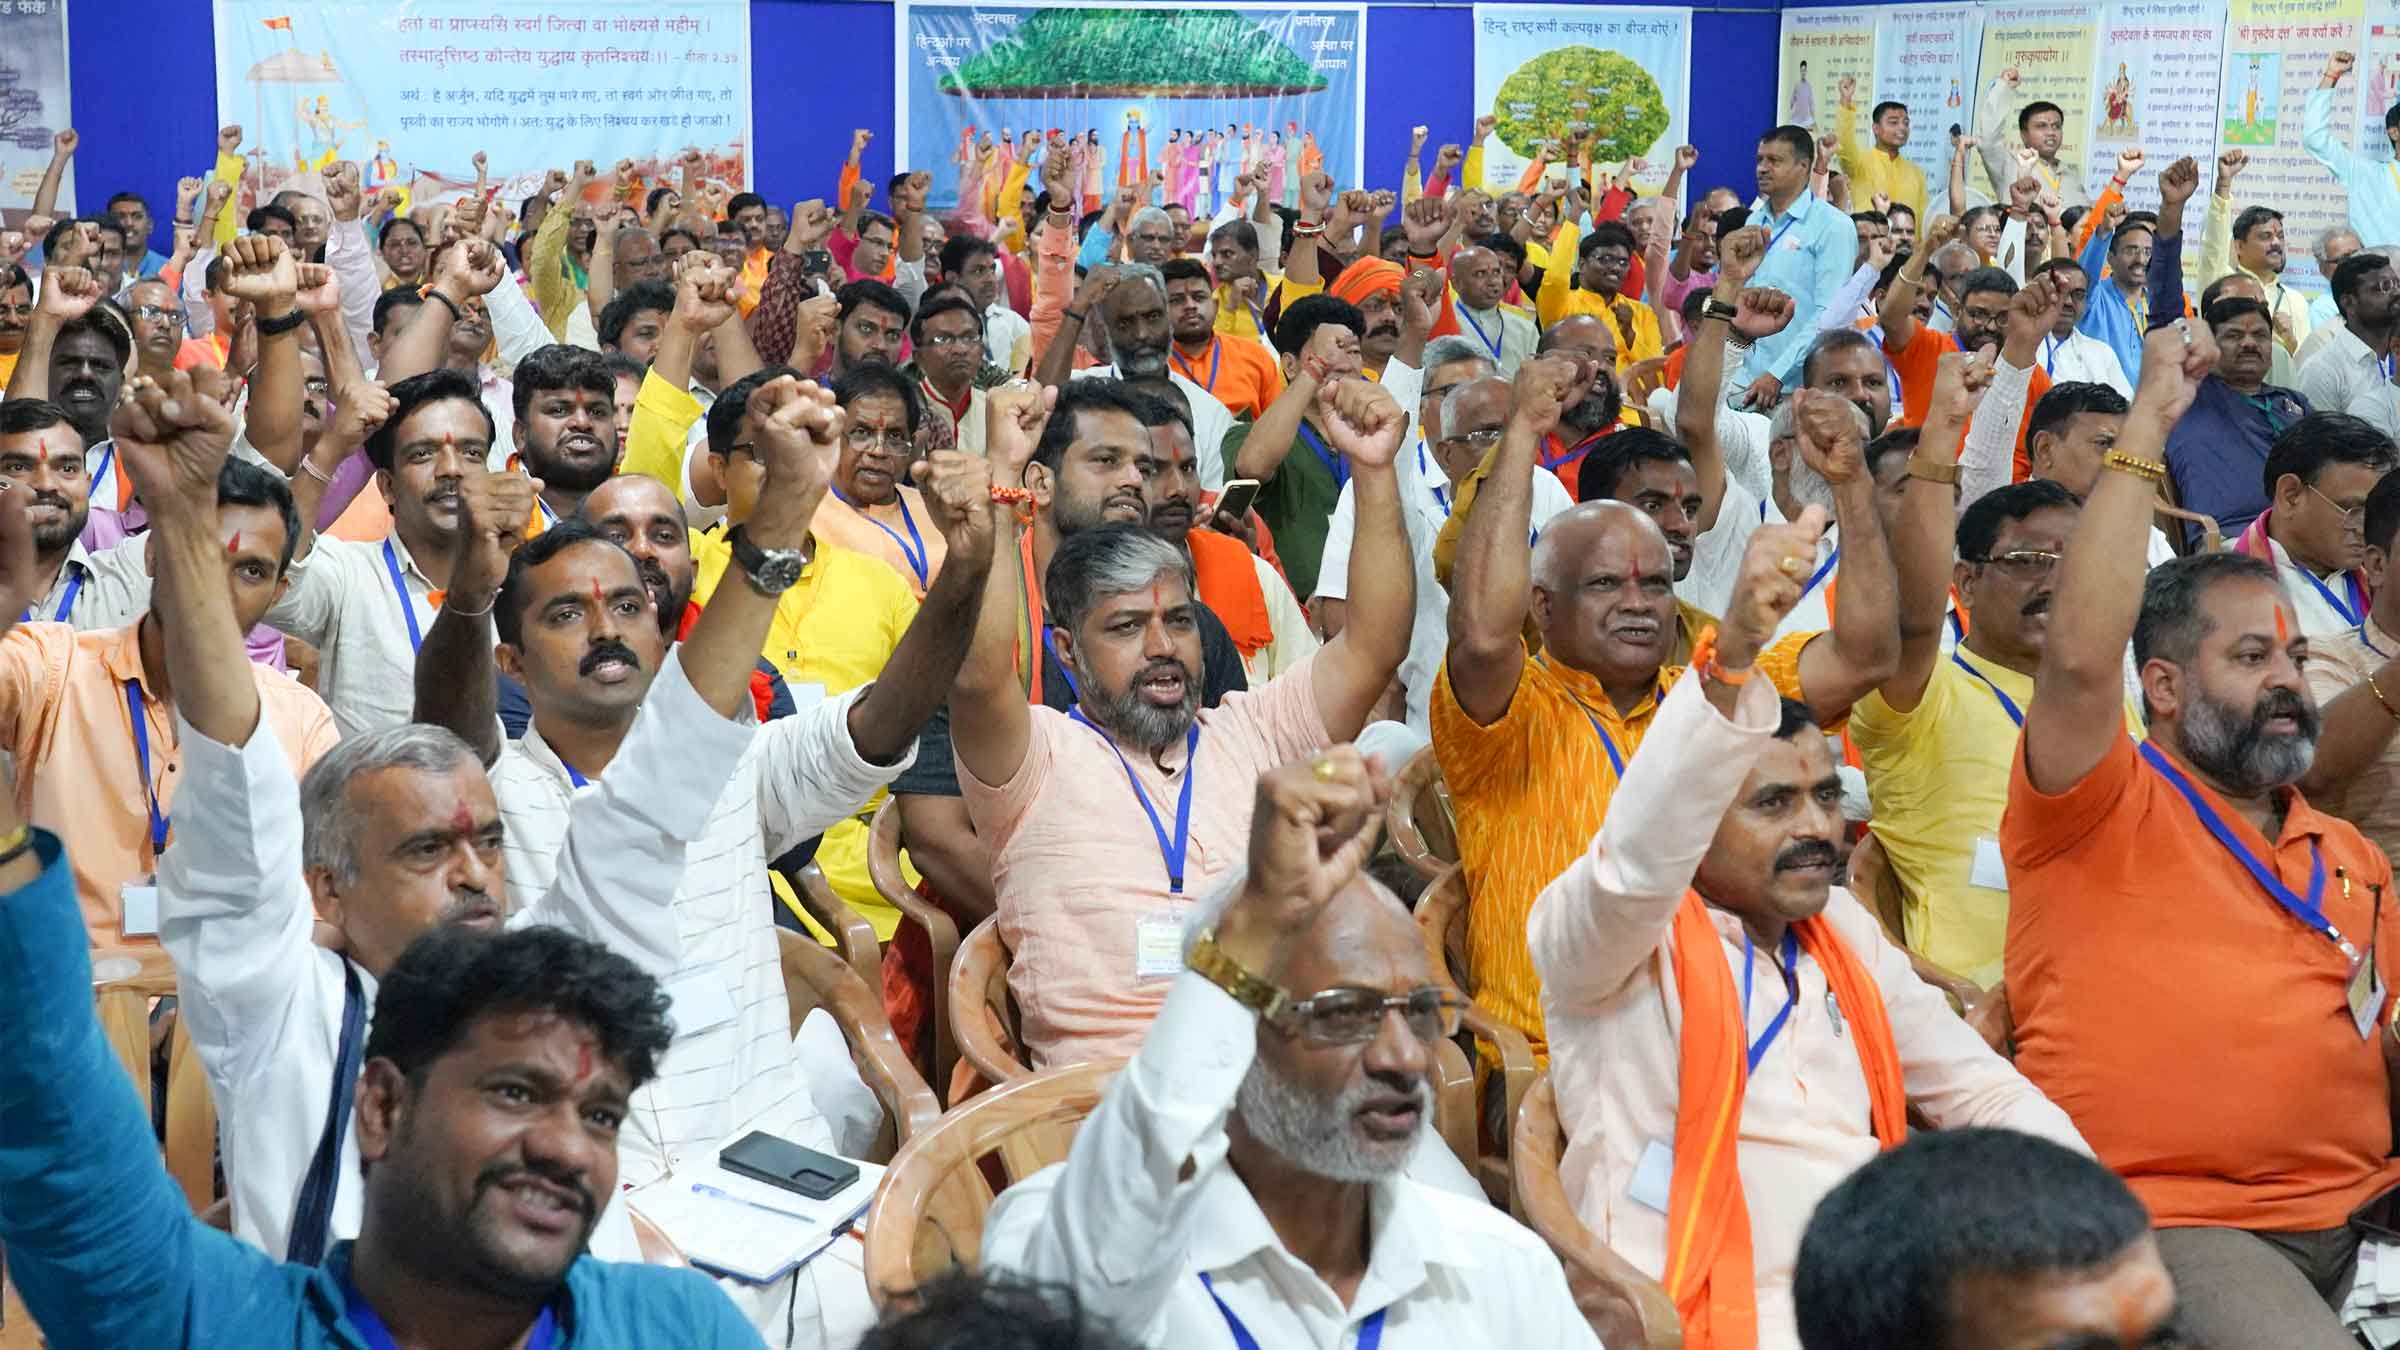 Participants enthusiastically raising the slogans of ‘Jayatu Jayatu Hindurashtram’ after getting inspired by the narration of experiences by delegates in the closing session of the Mahotsav